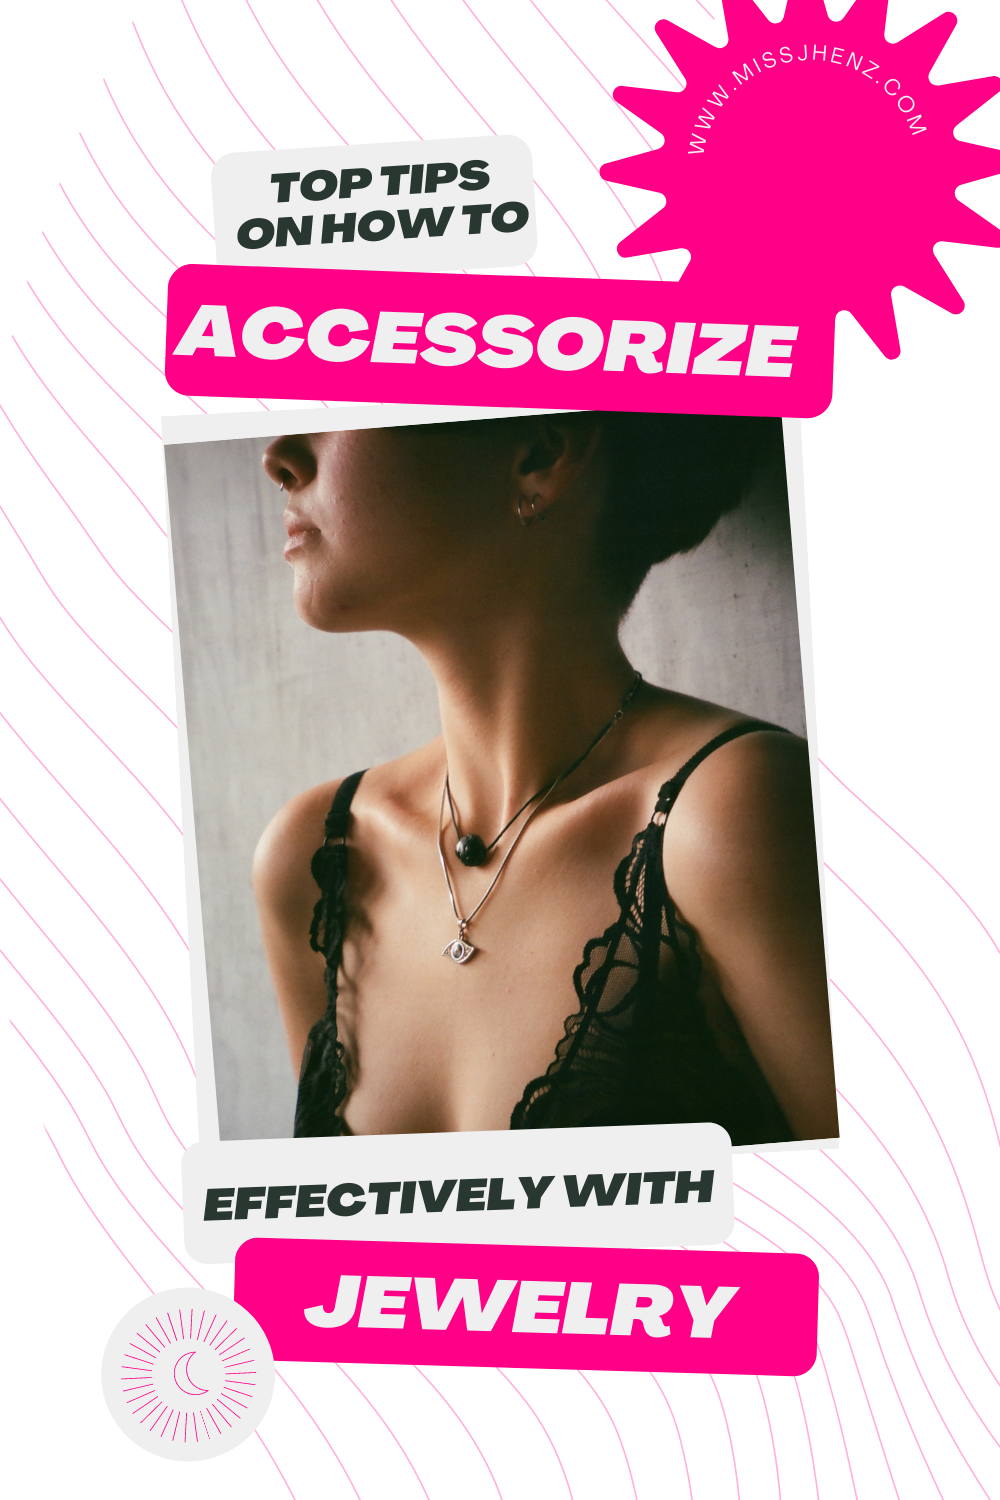 Top Tips on How to Accessorize Effectively With Jewelry